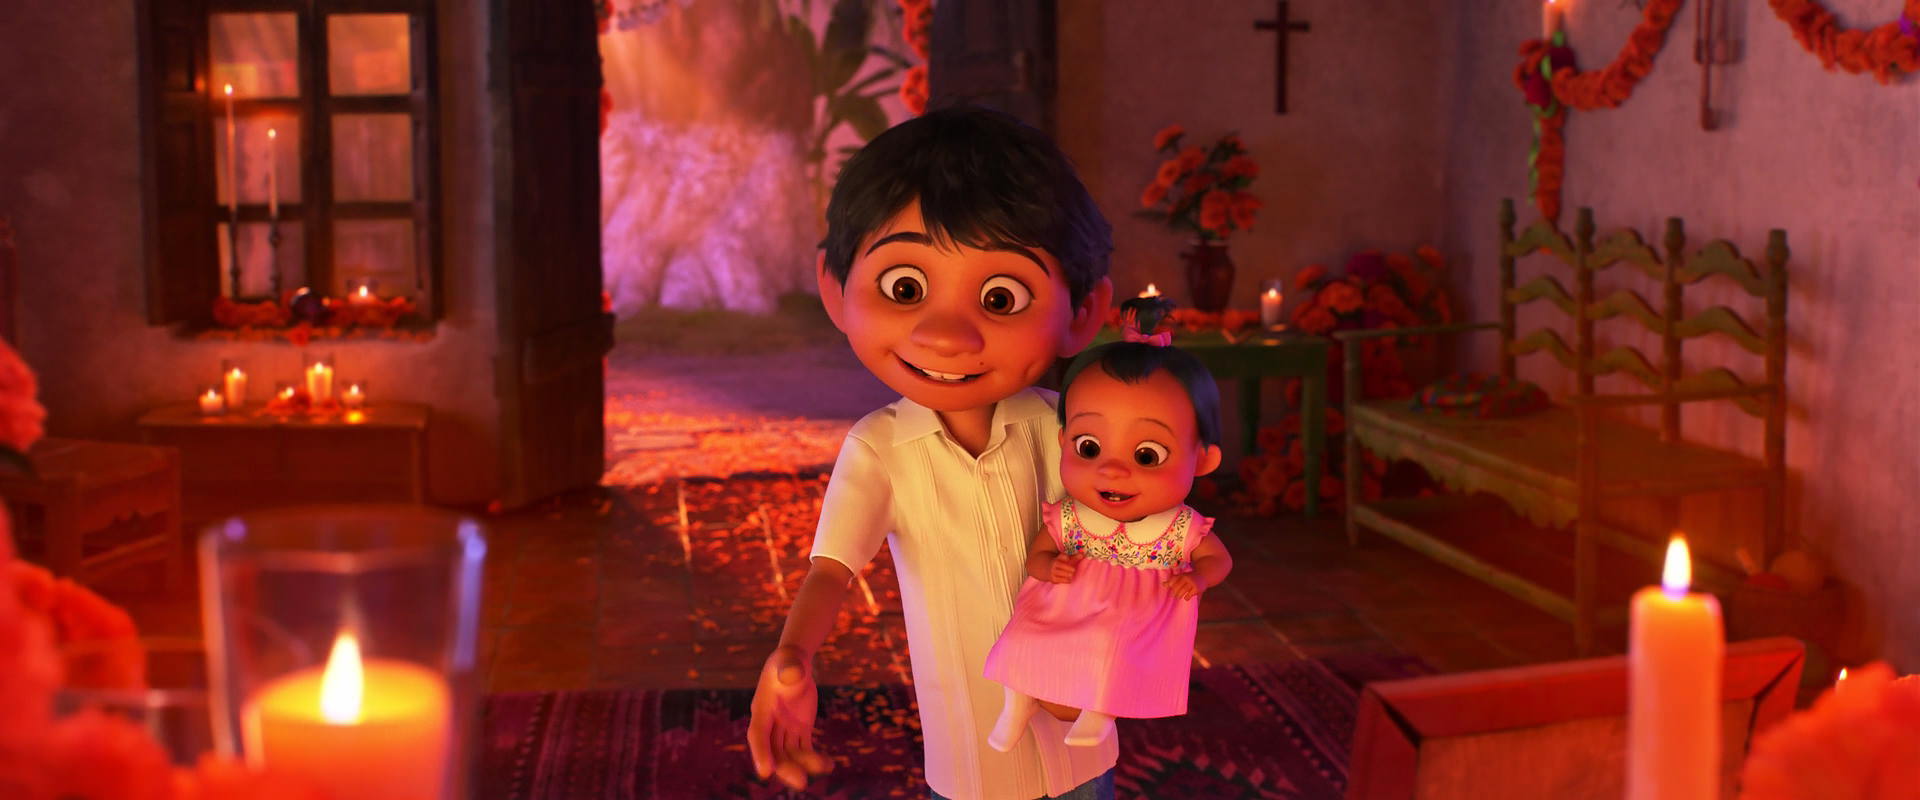 Coco 2: Release Date, Cast, Story Details, Rumors, Theories